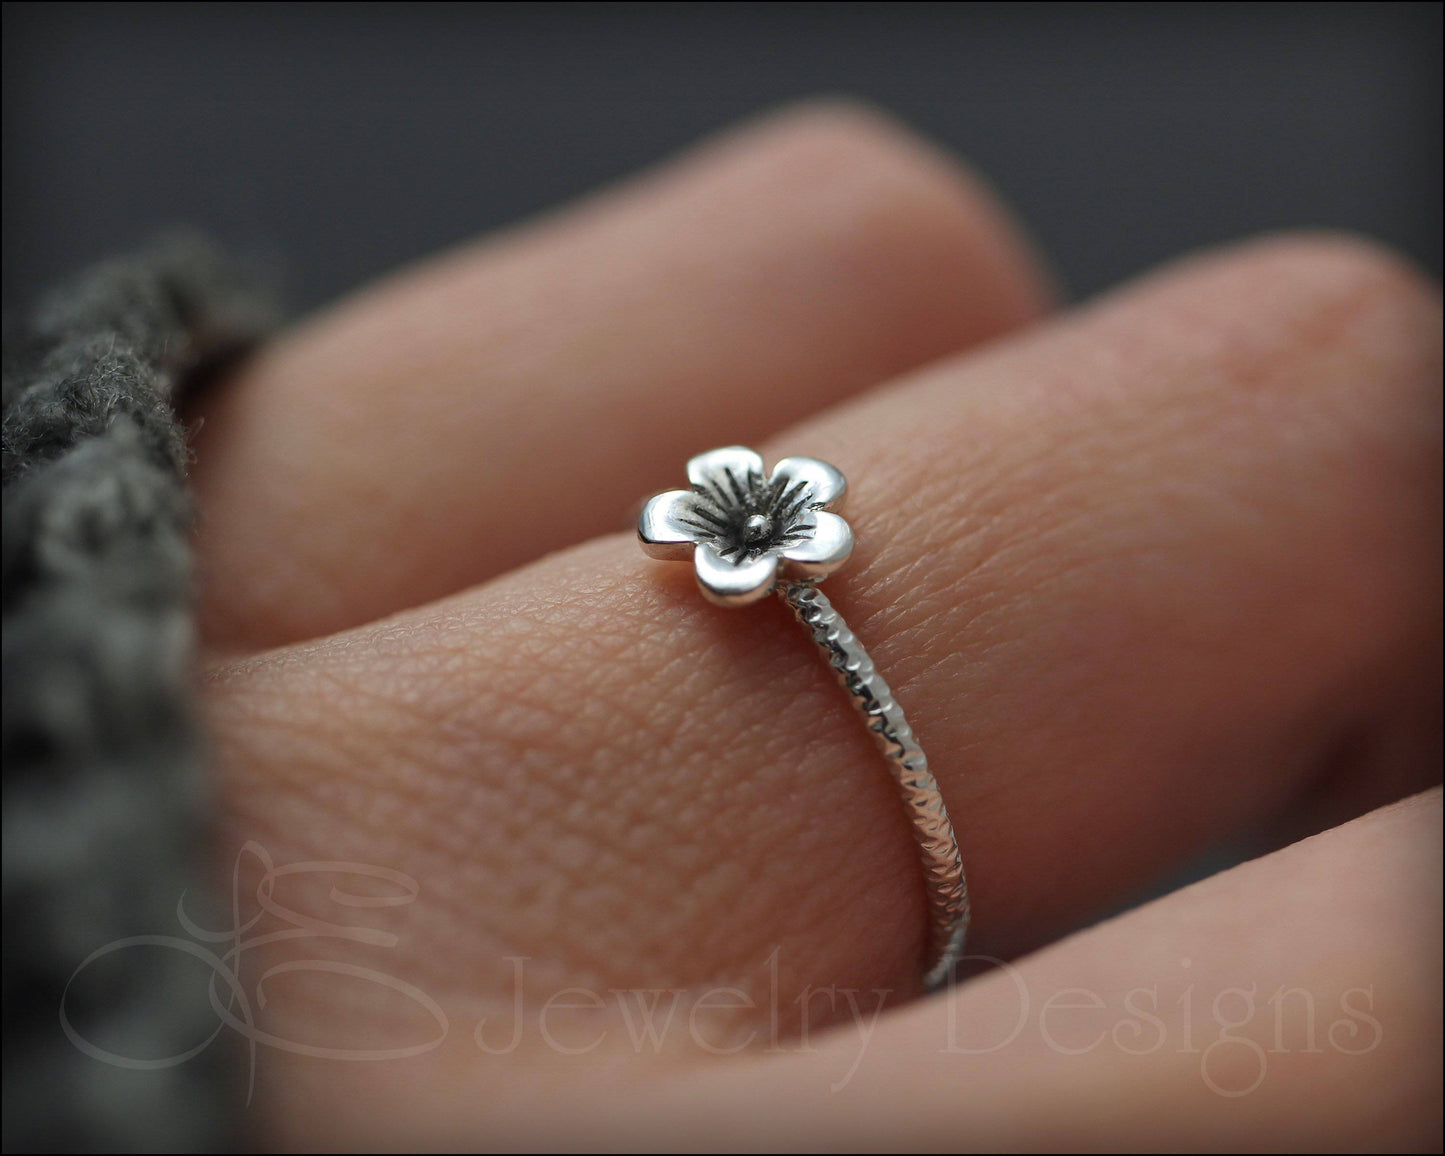 Dainty Cherry Blossom Ring - LE Jewelry Designs